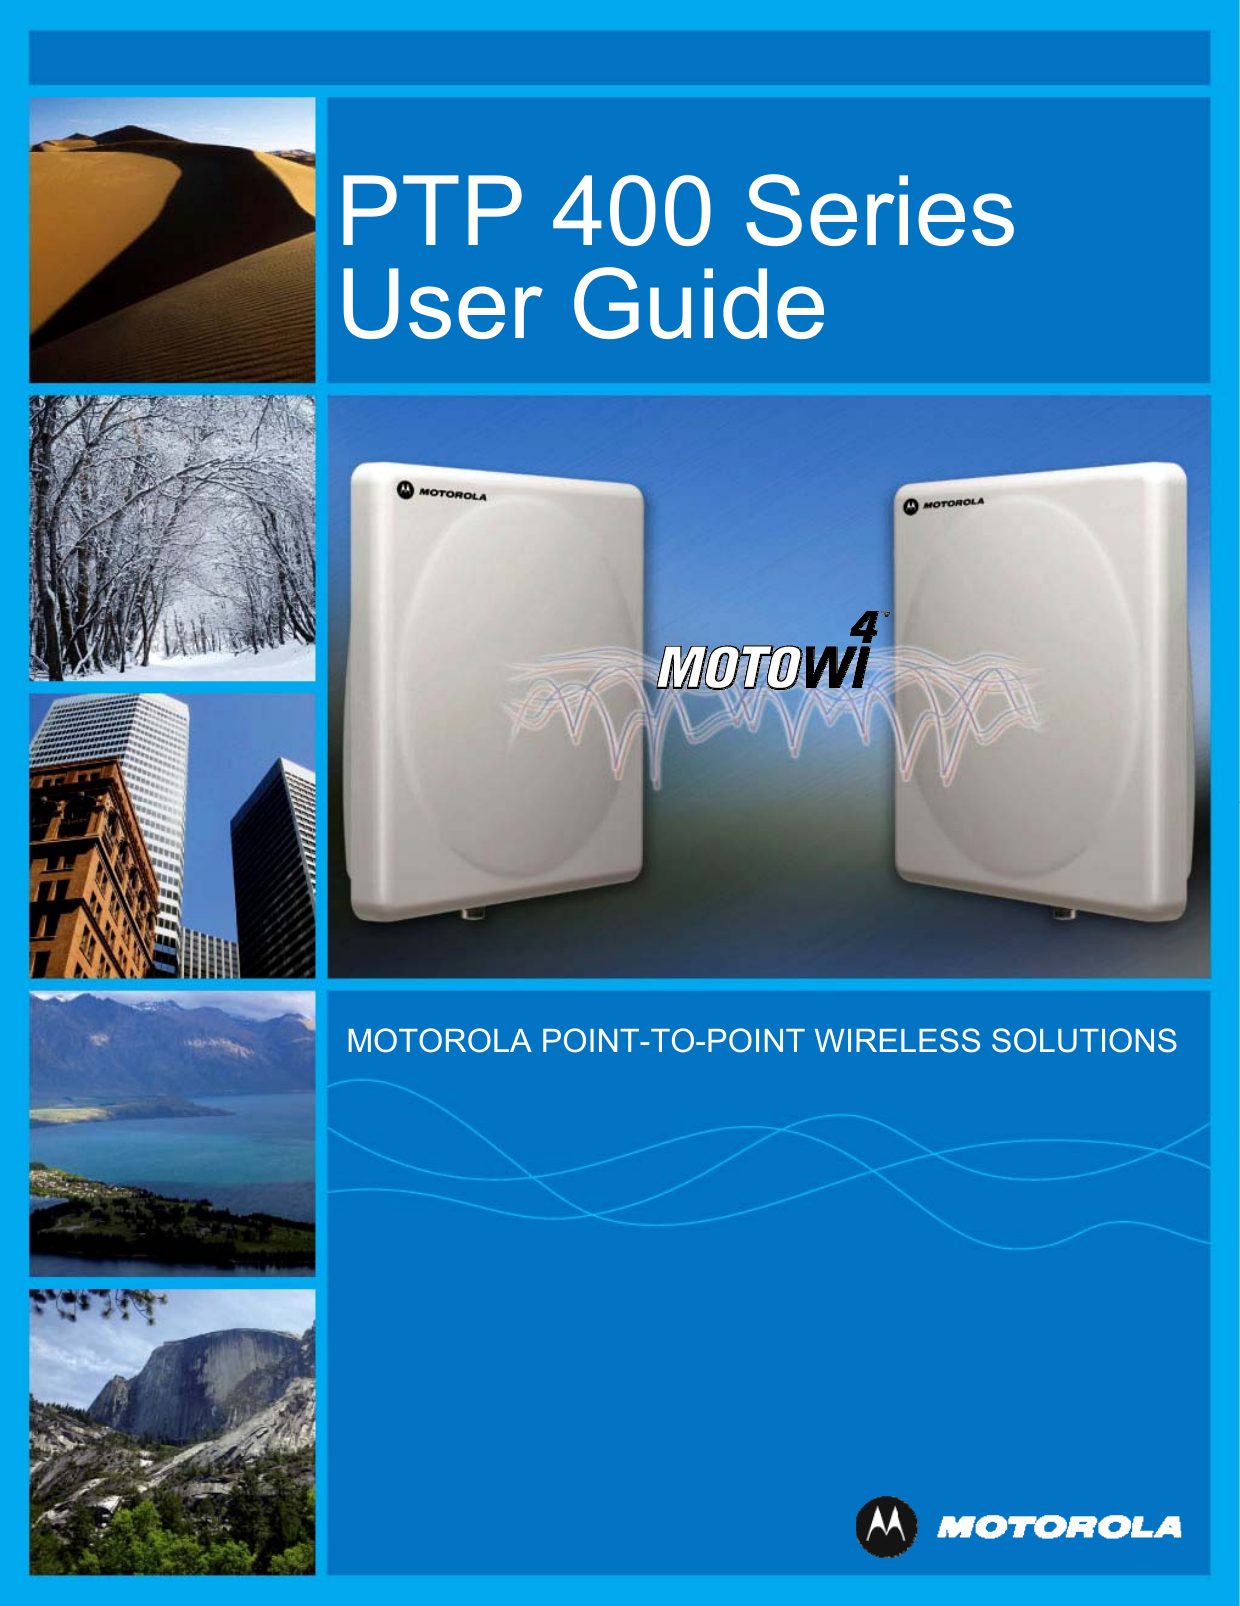   PTP 400 Series User Guide MOTOROLA POINT-TO-POINT WIRELESS SOLUTIONS 